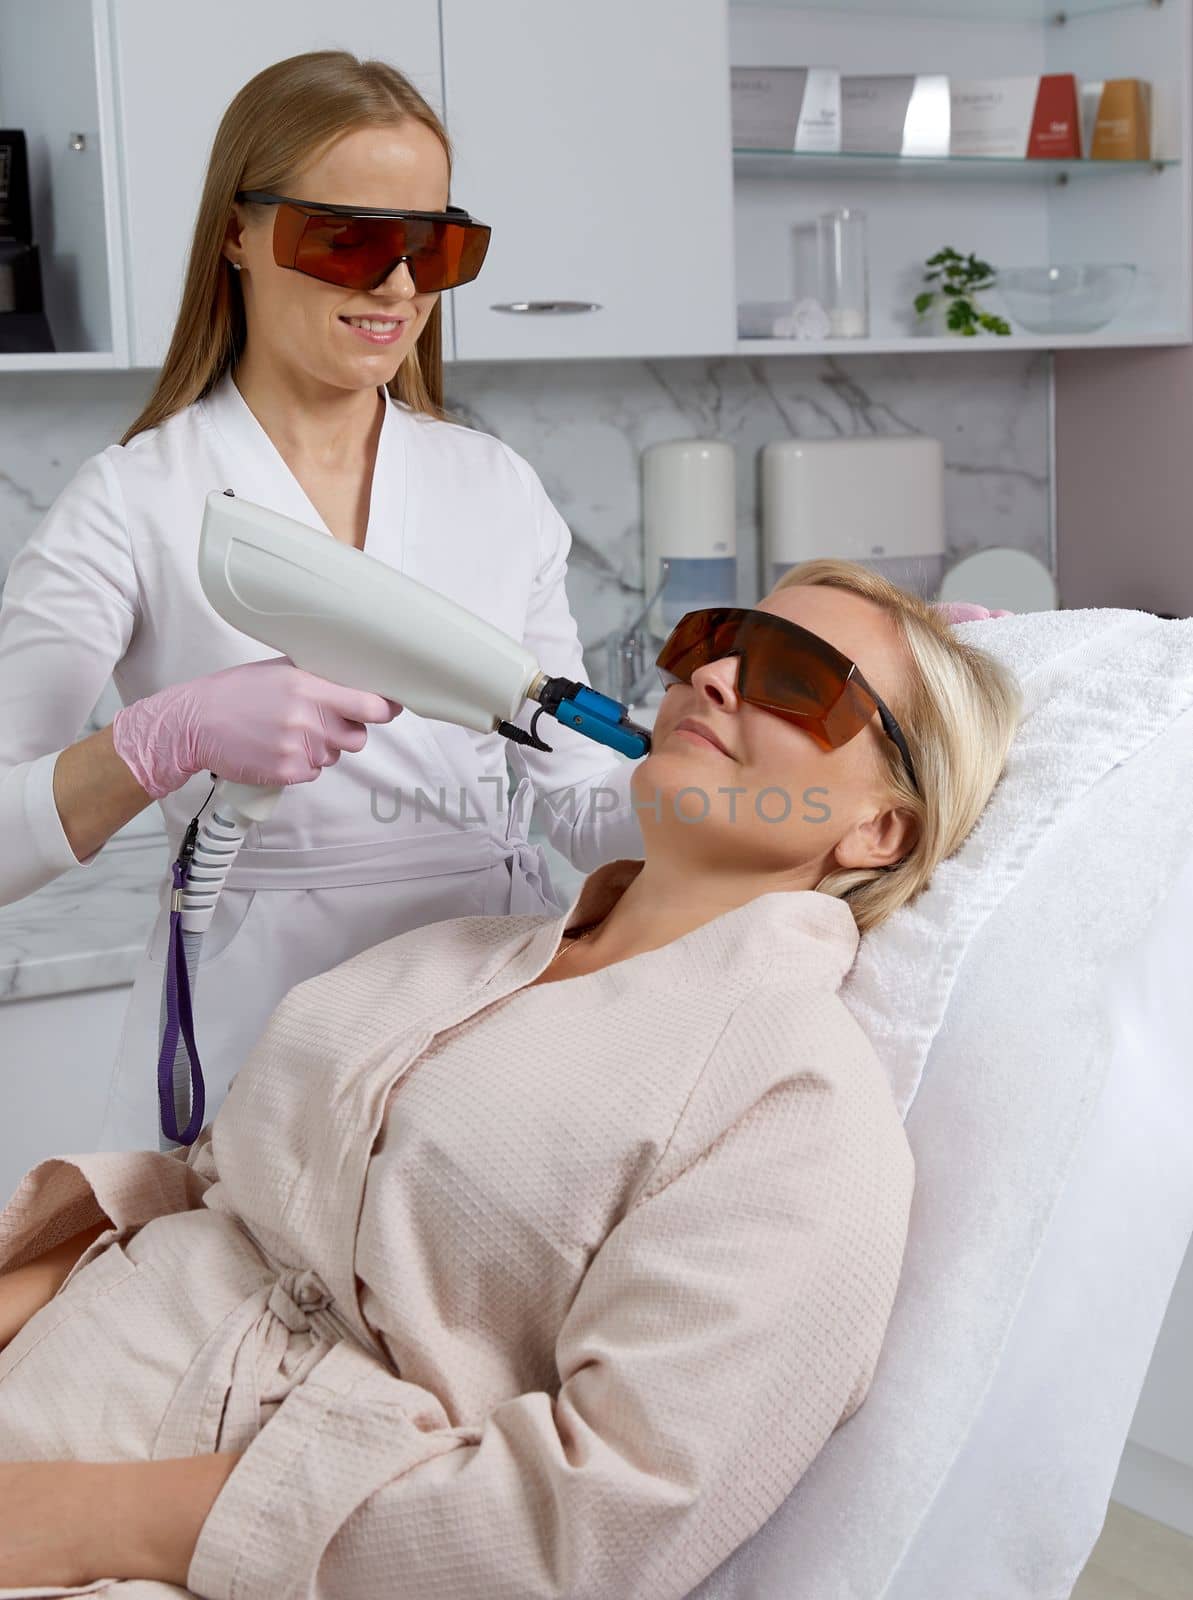 Woman receiving laser treatment in cosmetology clinic by Mariakray